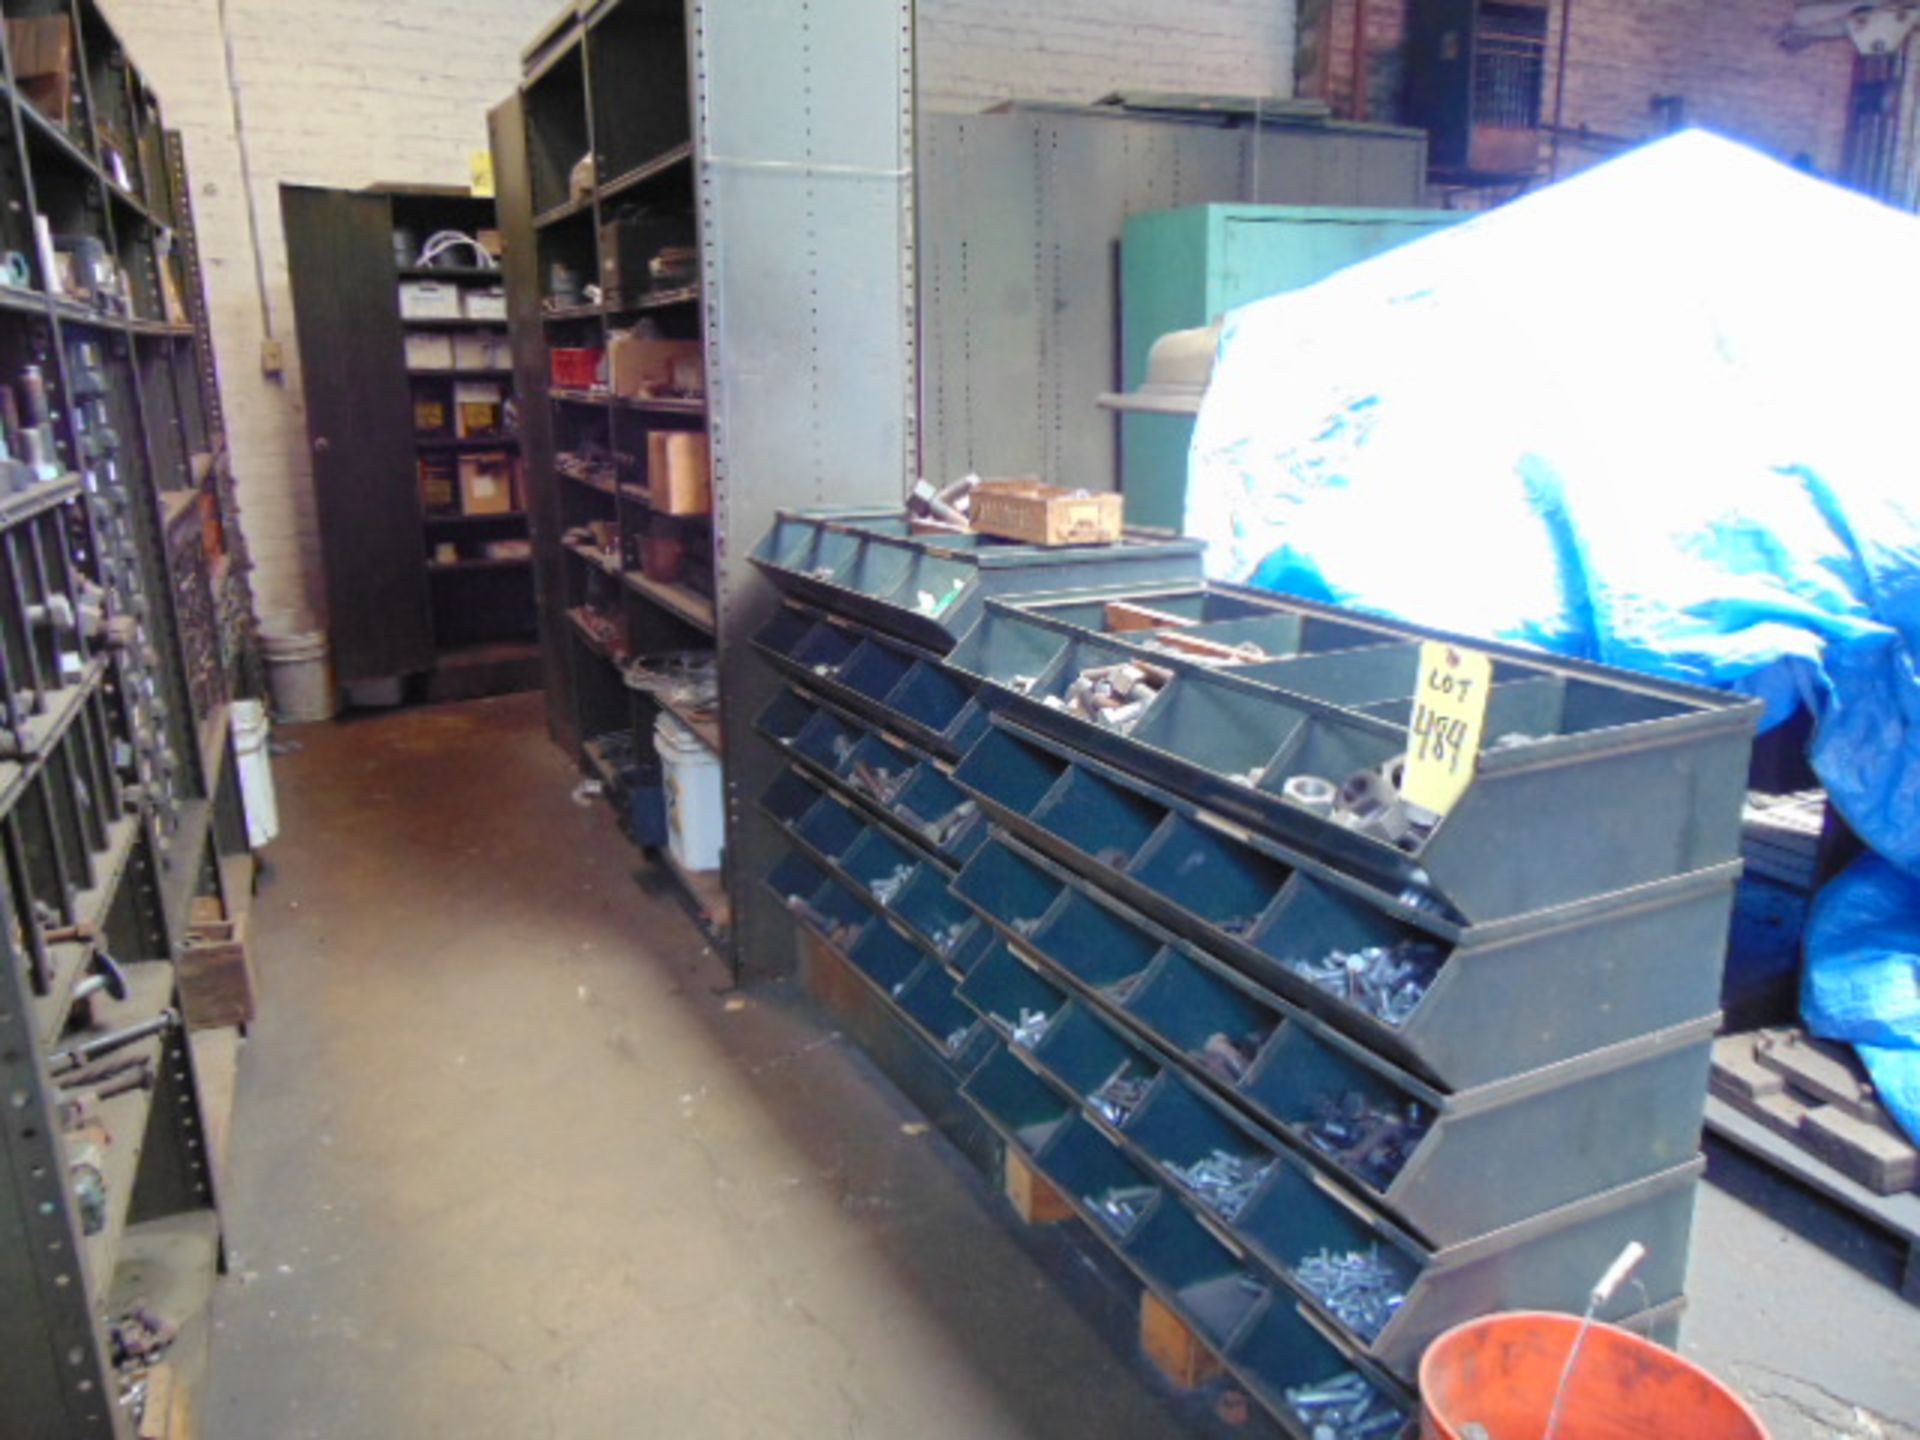 LOT CONSISTING OF: assorted nuts, bolts, hardware, steel bins & (2) sections of shelving